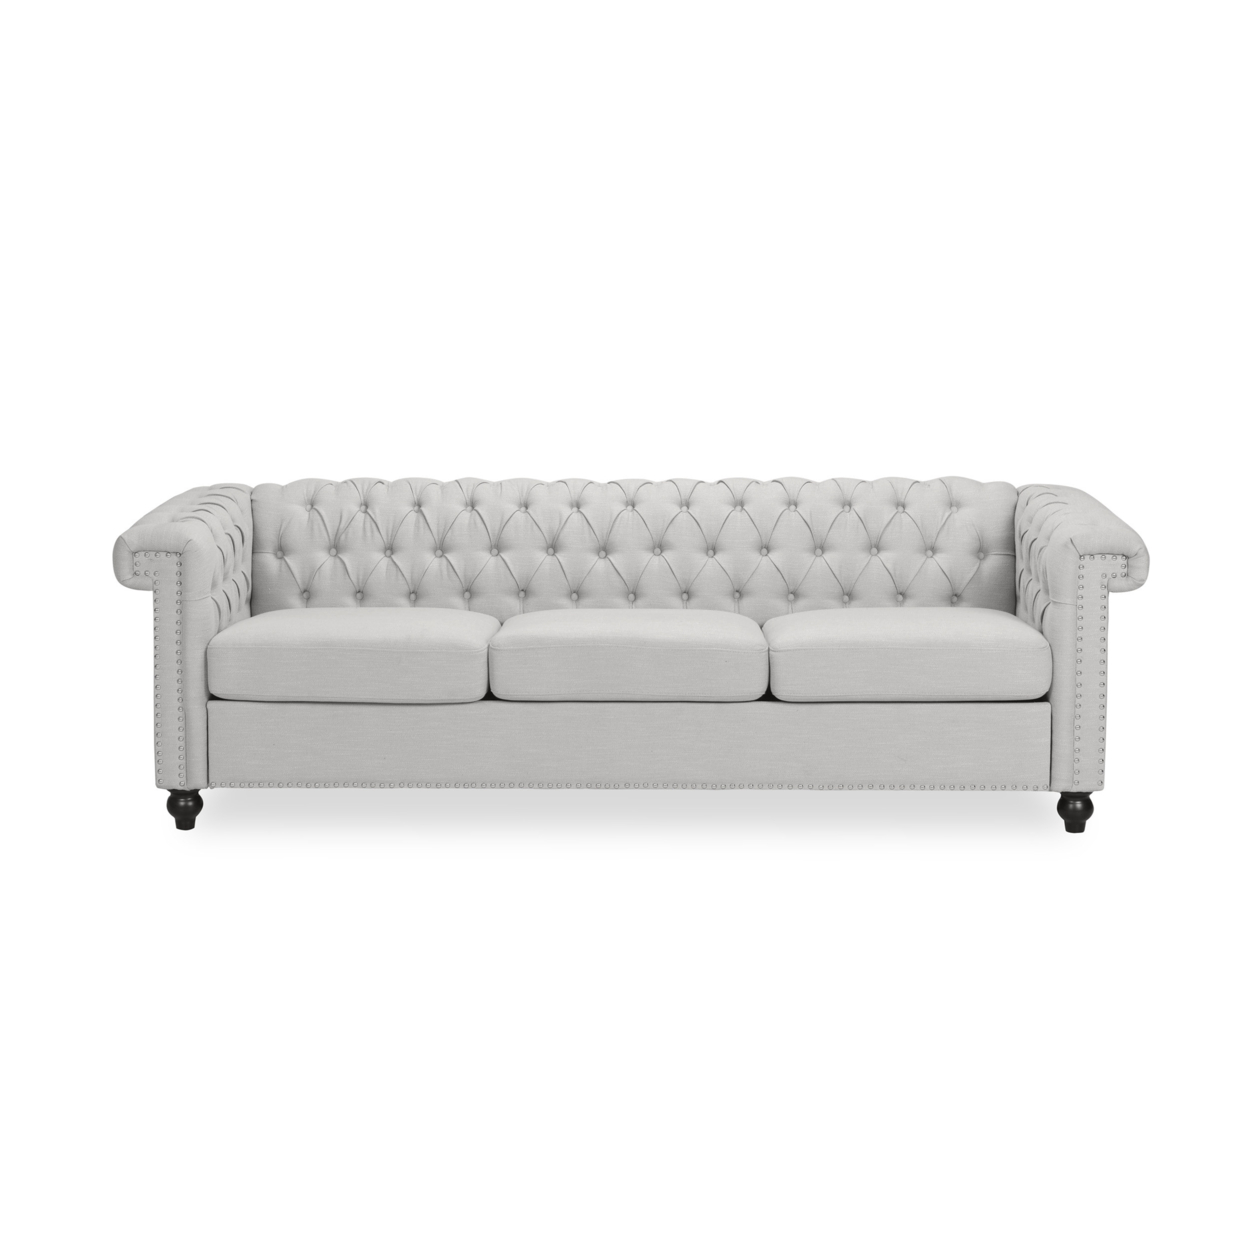 Zyiere Tufted Fabric Chesterfield 3 Seater Sofa